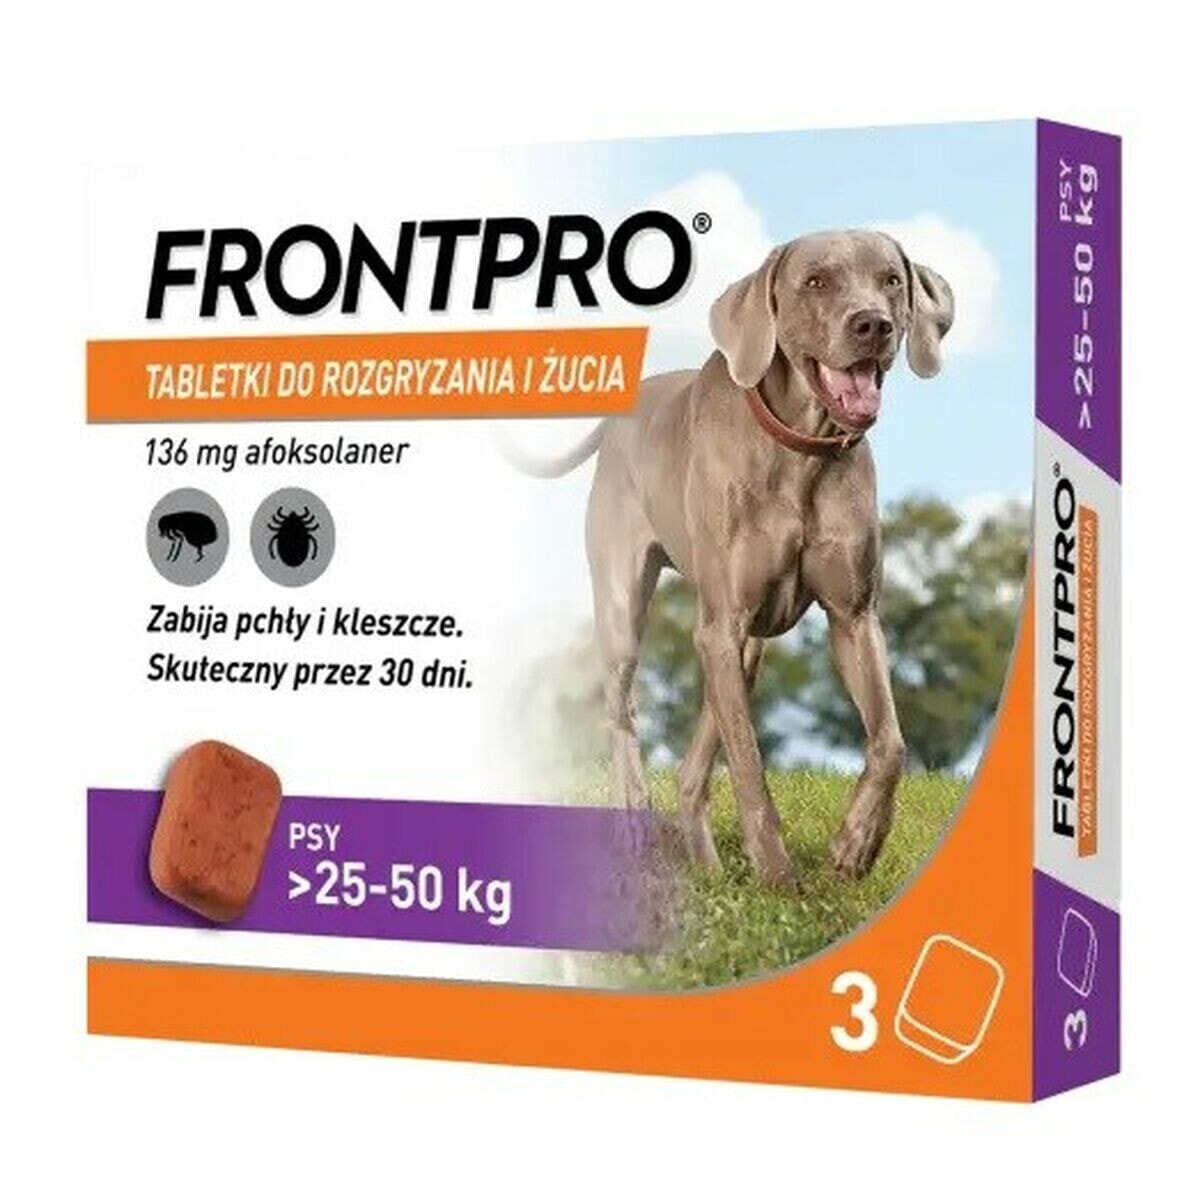 Tablets FRONTPRO 612474 15 g 3 x 136 mg Suitable for dogs of up to >25-50 kg